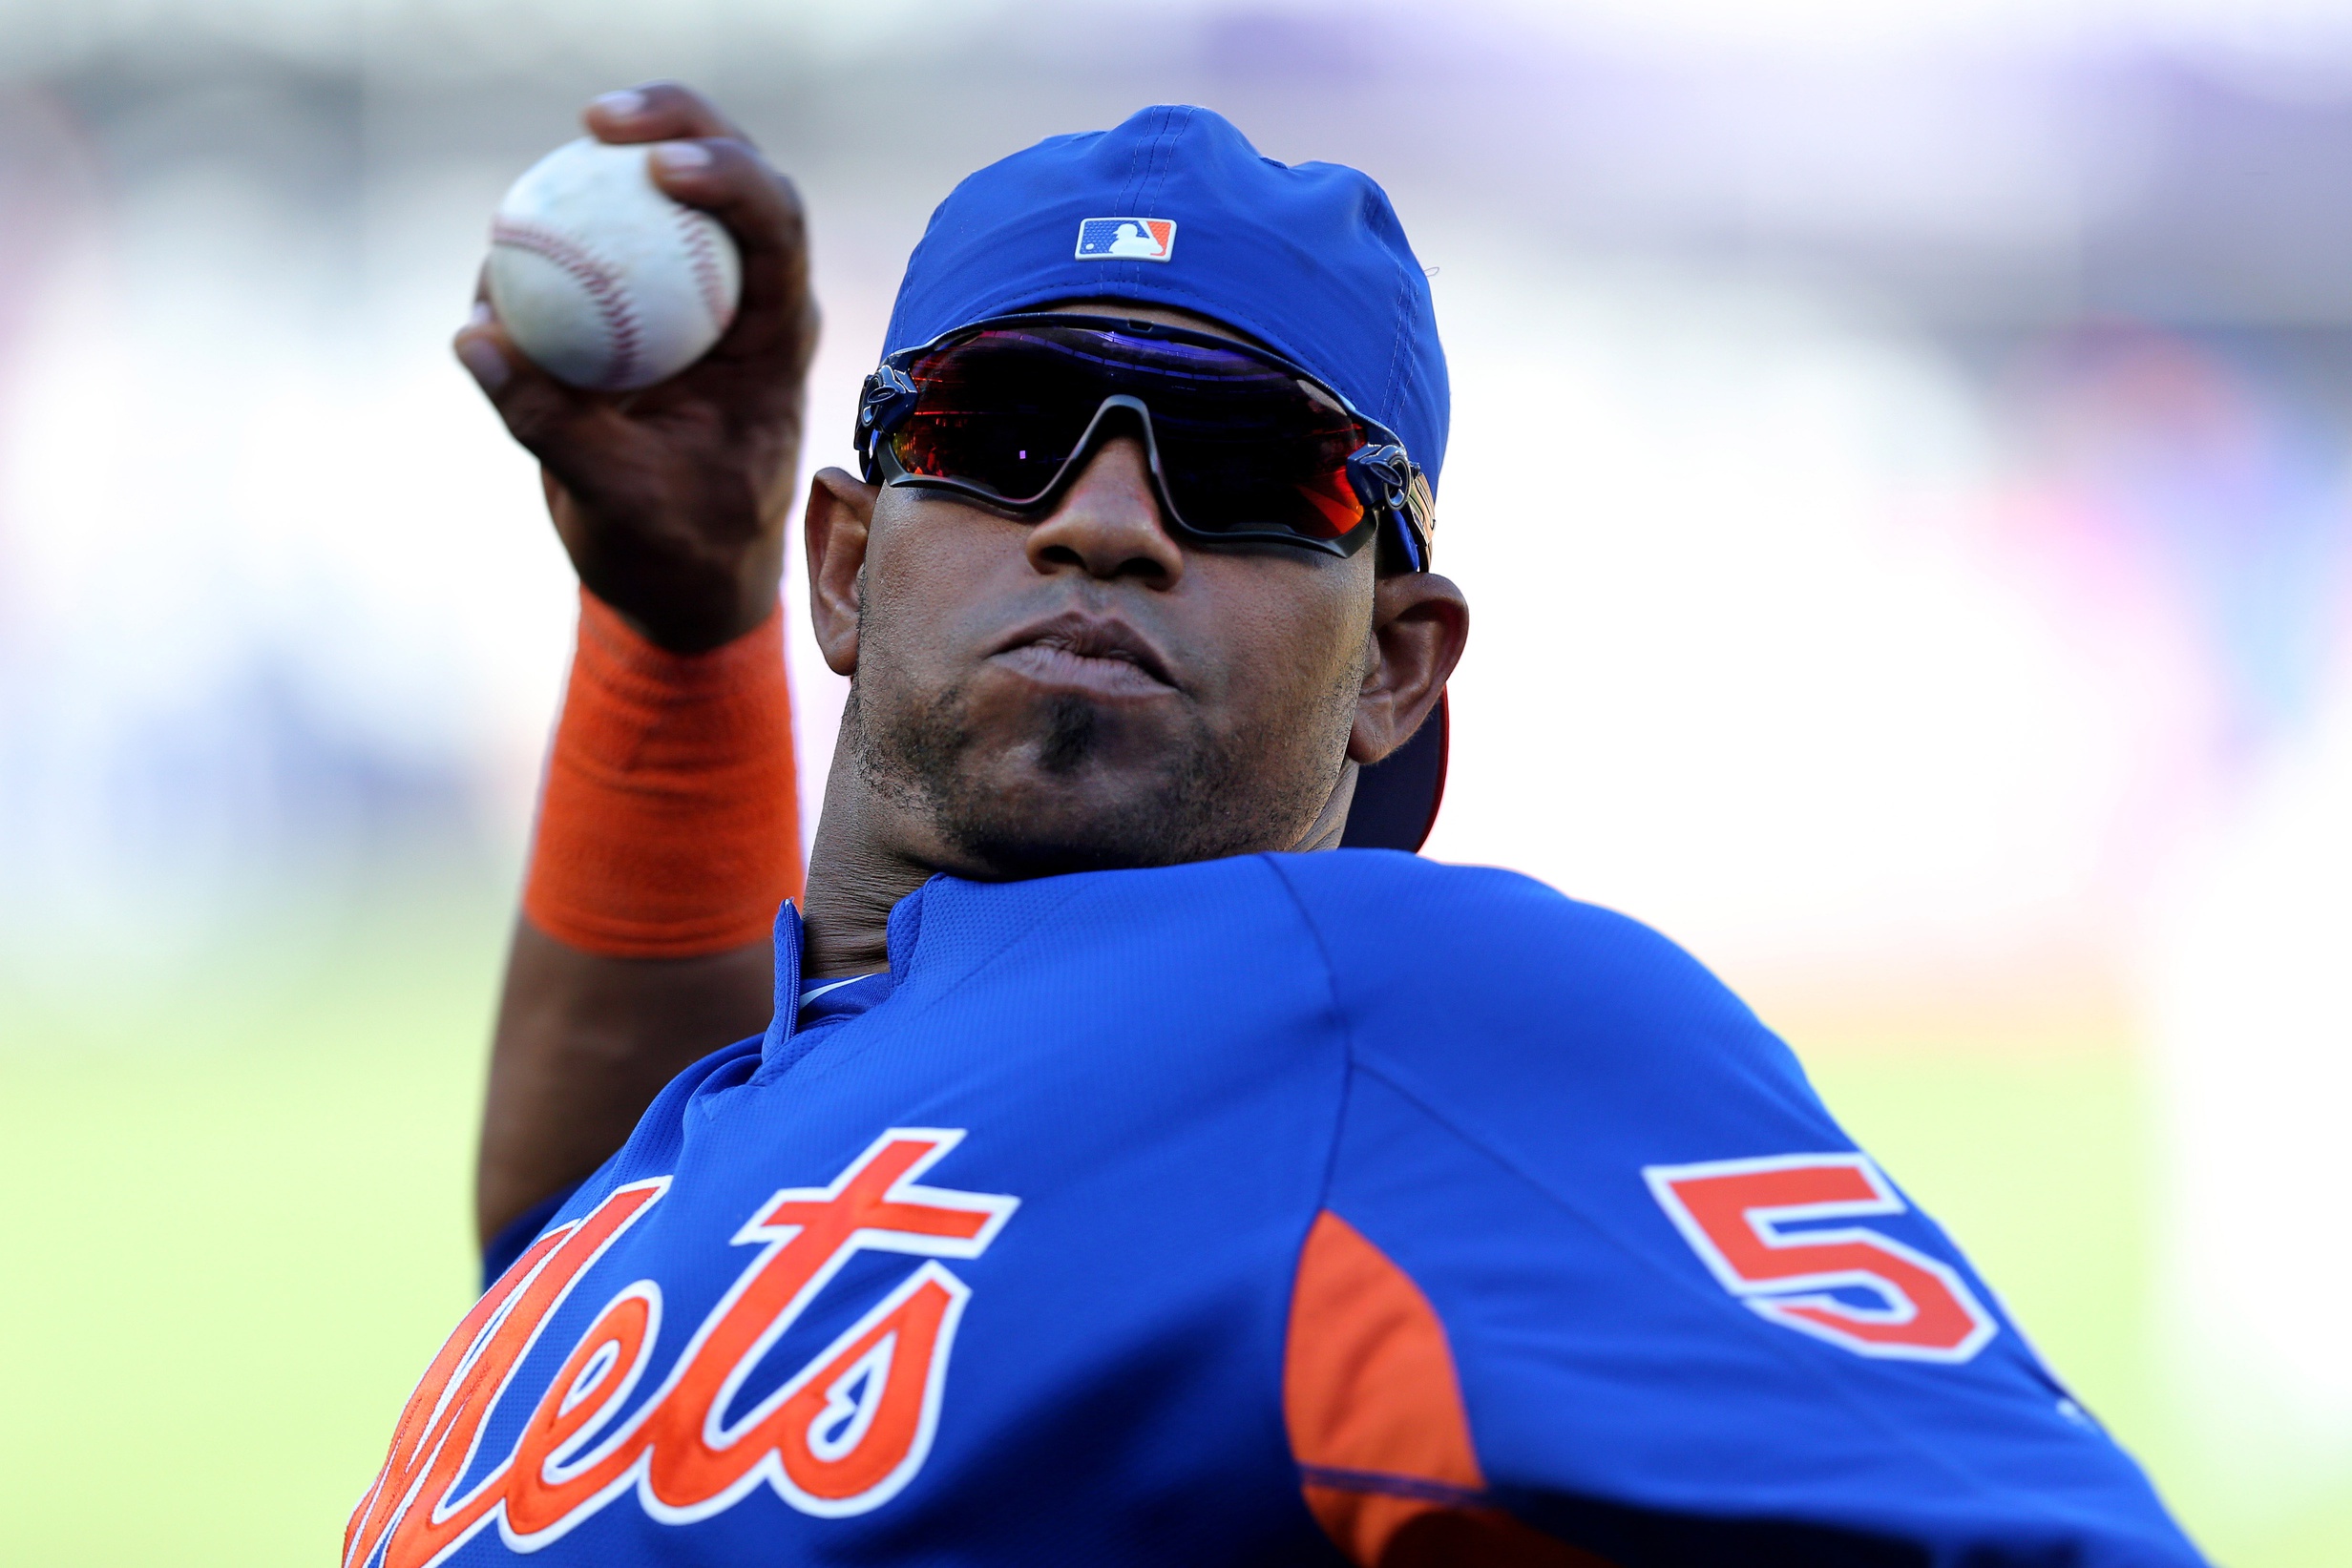 Yoenis Céspedes took a staggering pay cut to stay with Mets